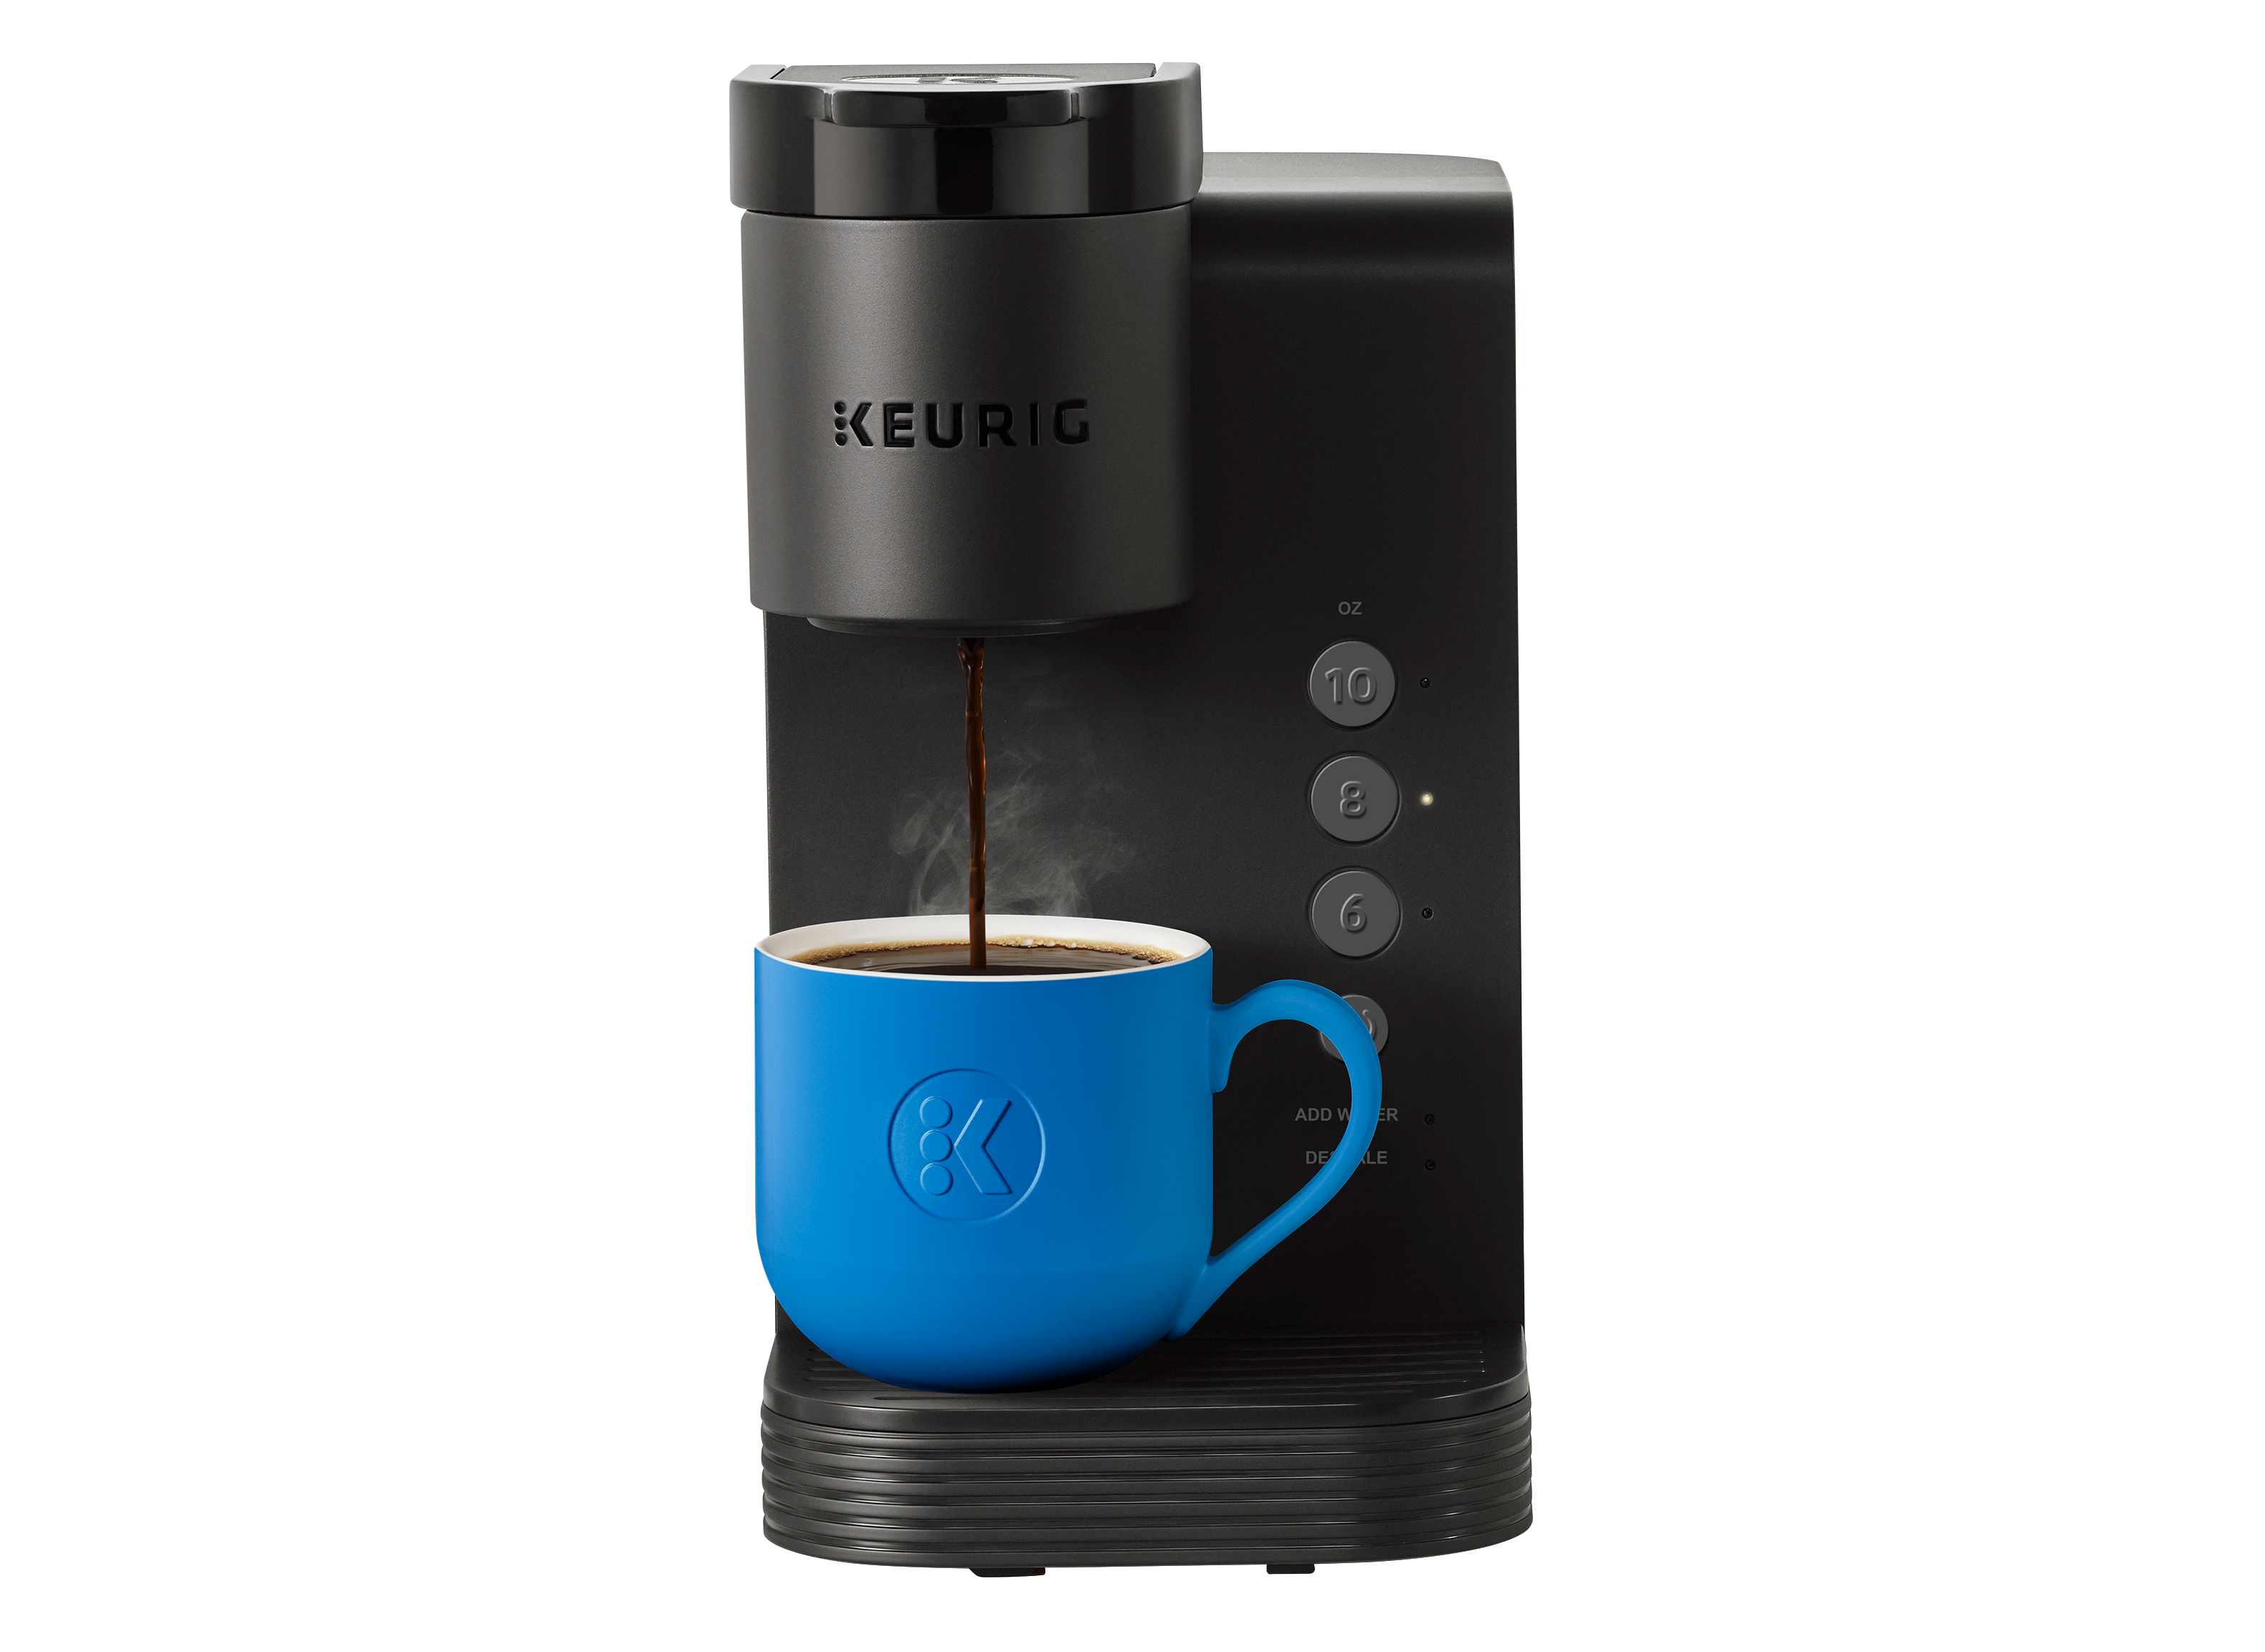 https://crdms.images.consumerreports.org/prod/products/cr/models/404052-pod-coffee-makers-keurig-k-express-essentials-500036269-10021326.png